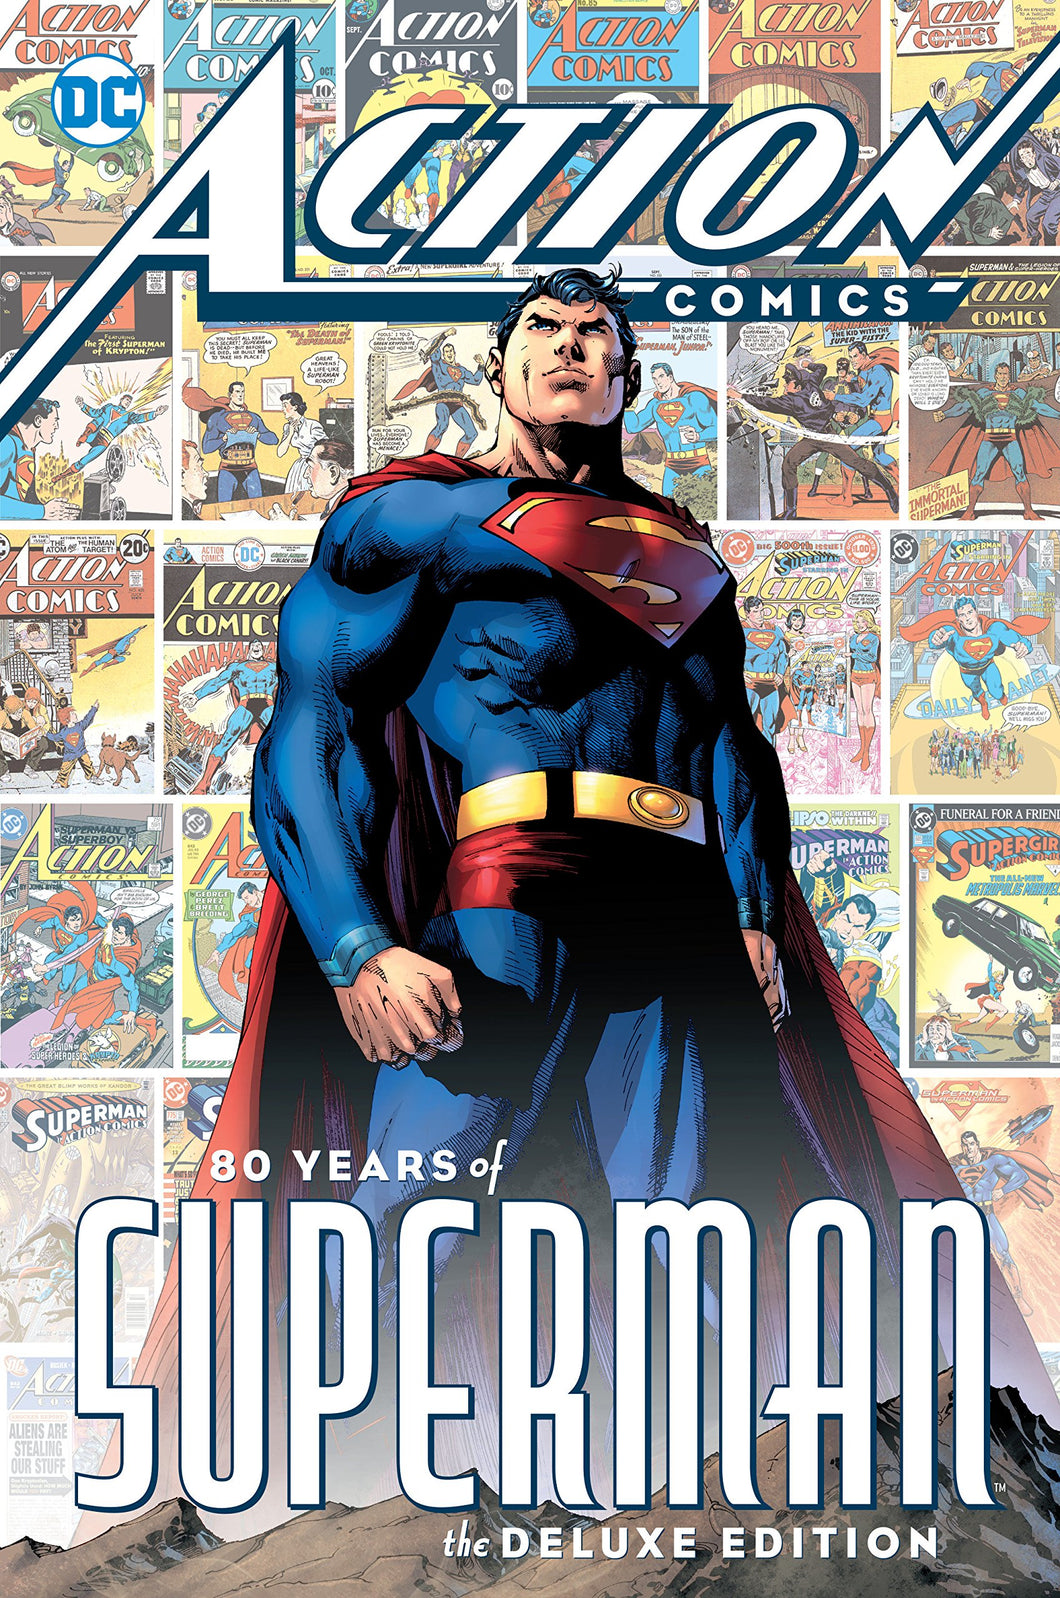 Action Comics : 80 Years of Superman Deluxe Edition